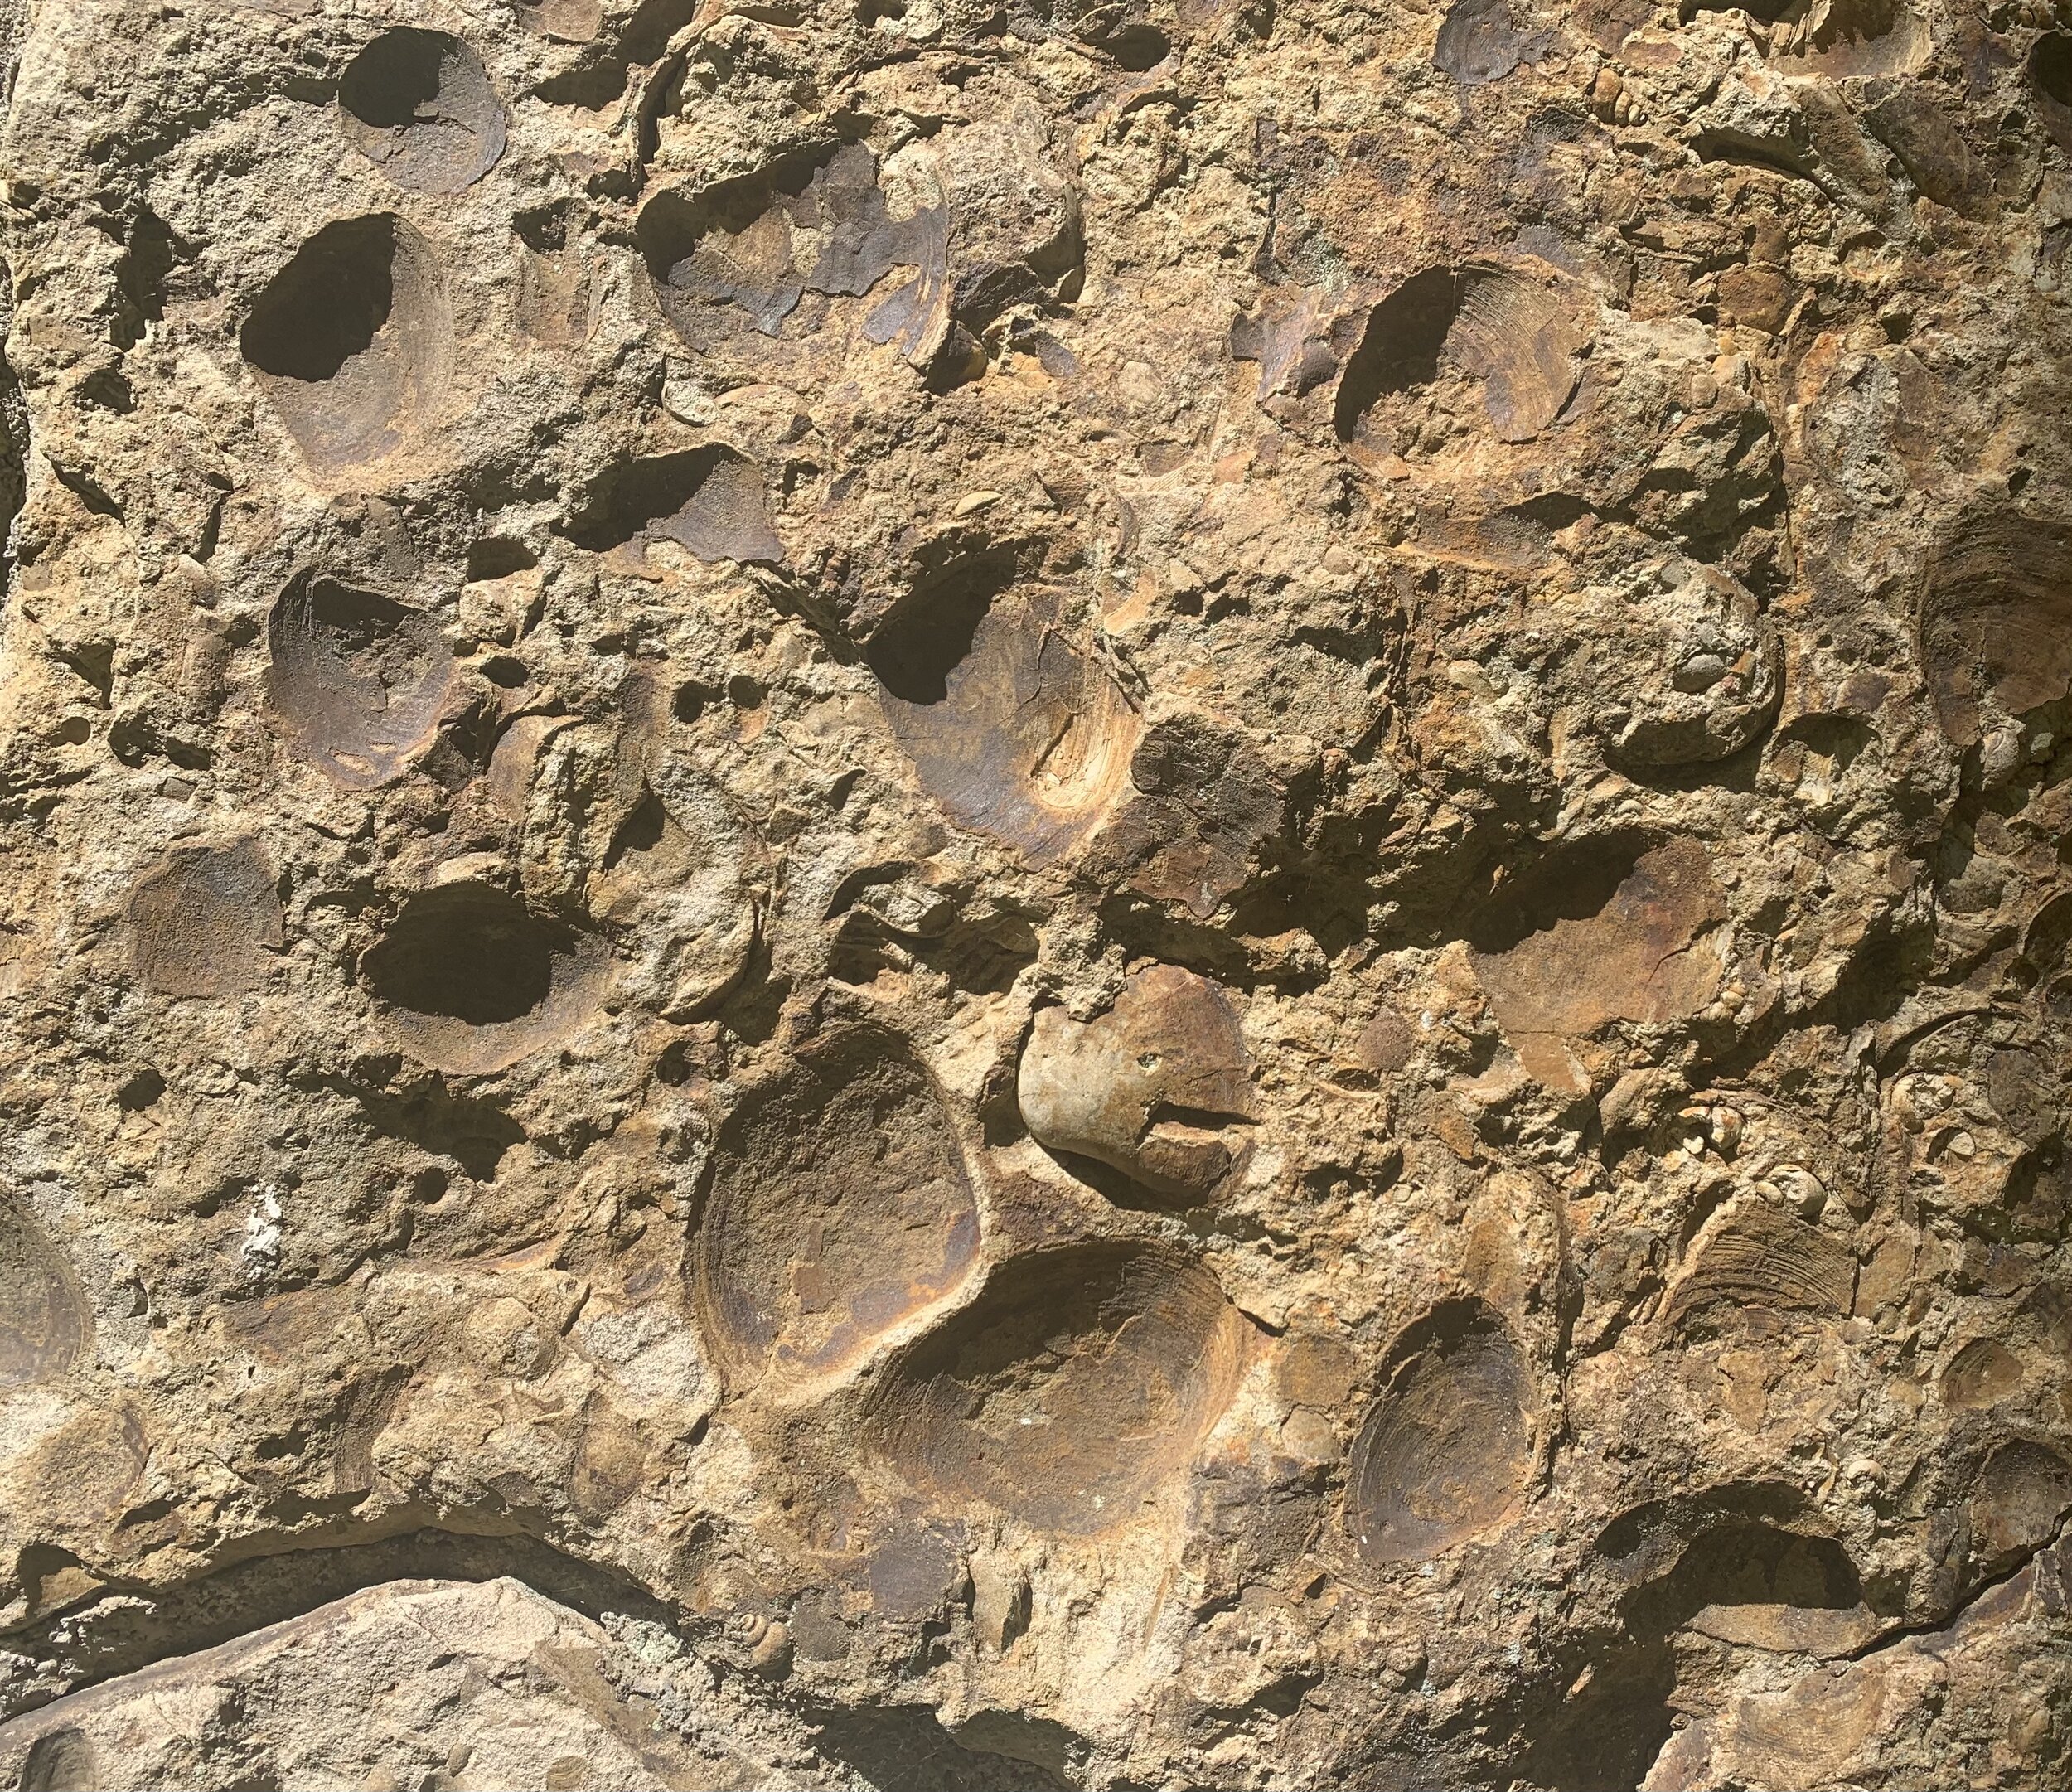  Shell fossils in the stone walls date back 26 million years. 